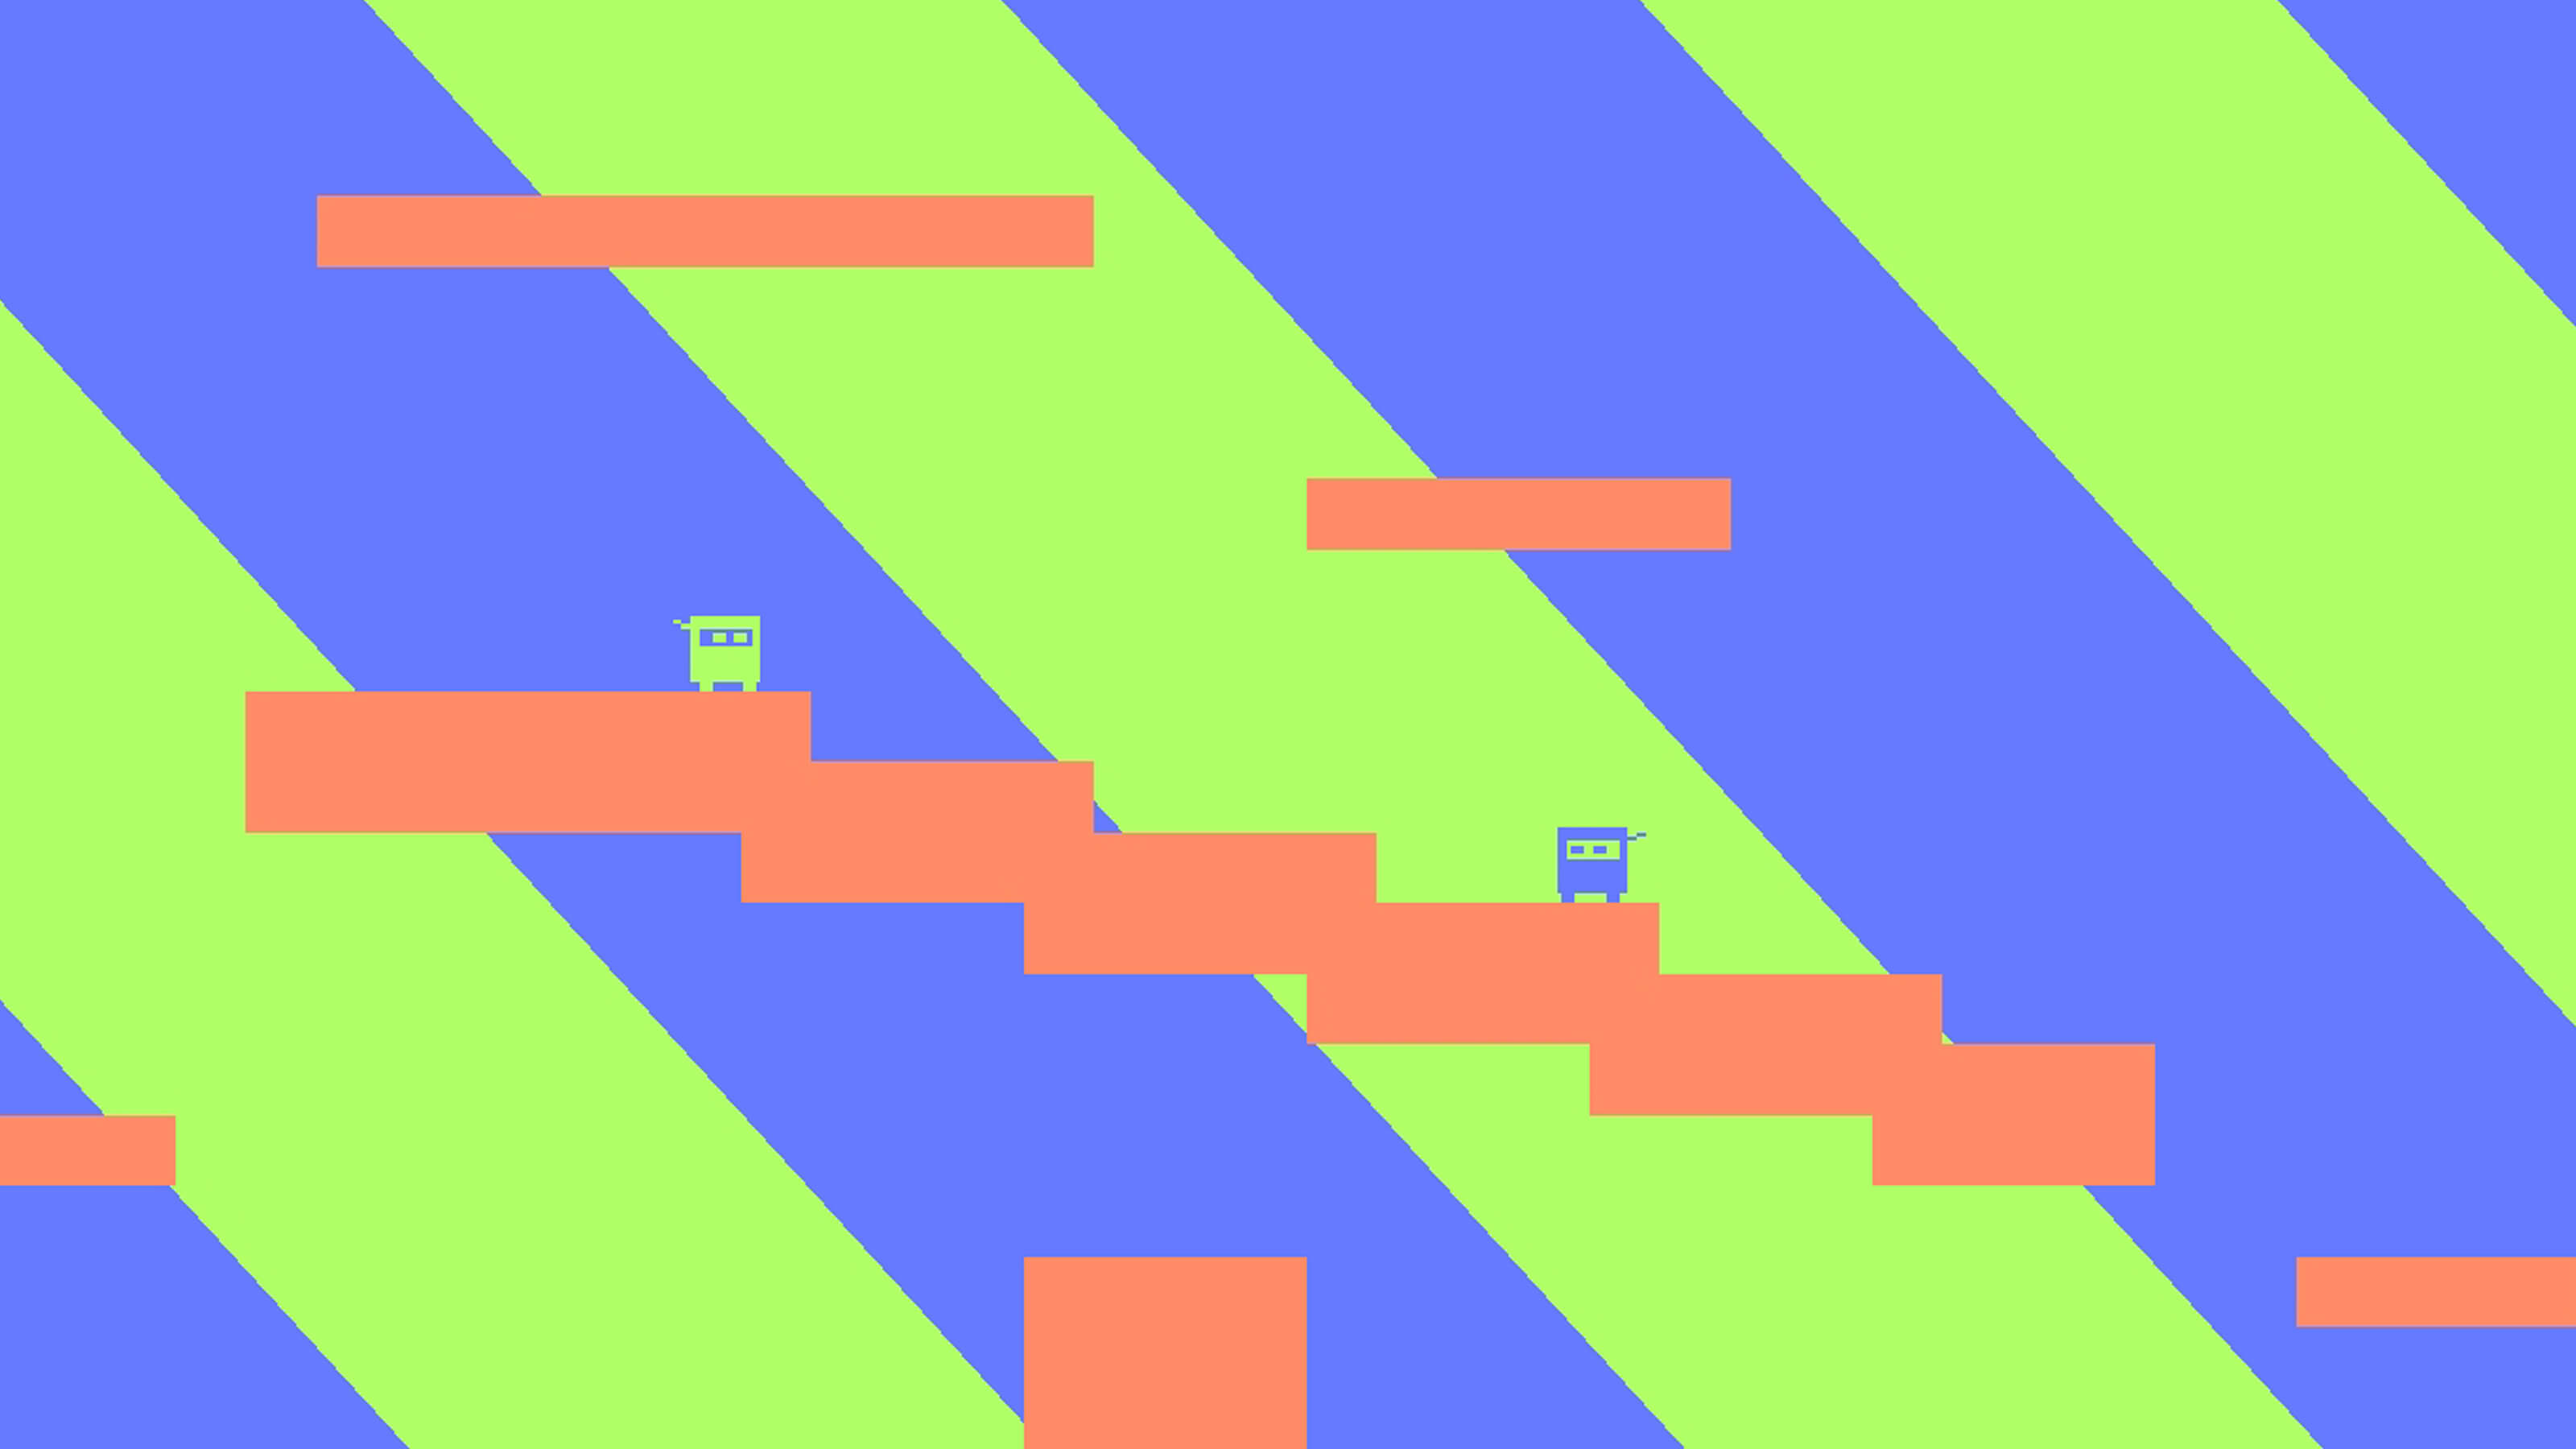 Two square green and blue ninjas face each other on a peach colored zig-zagging platform.